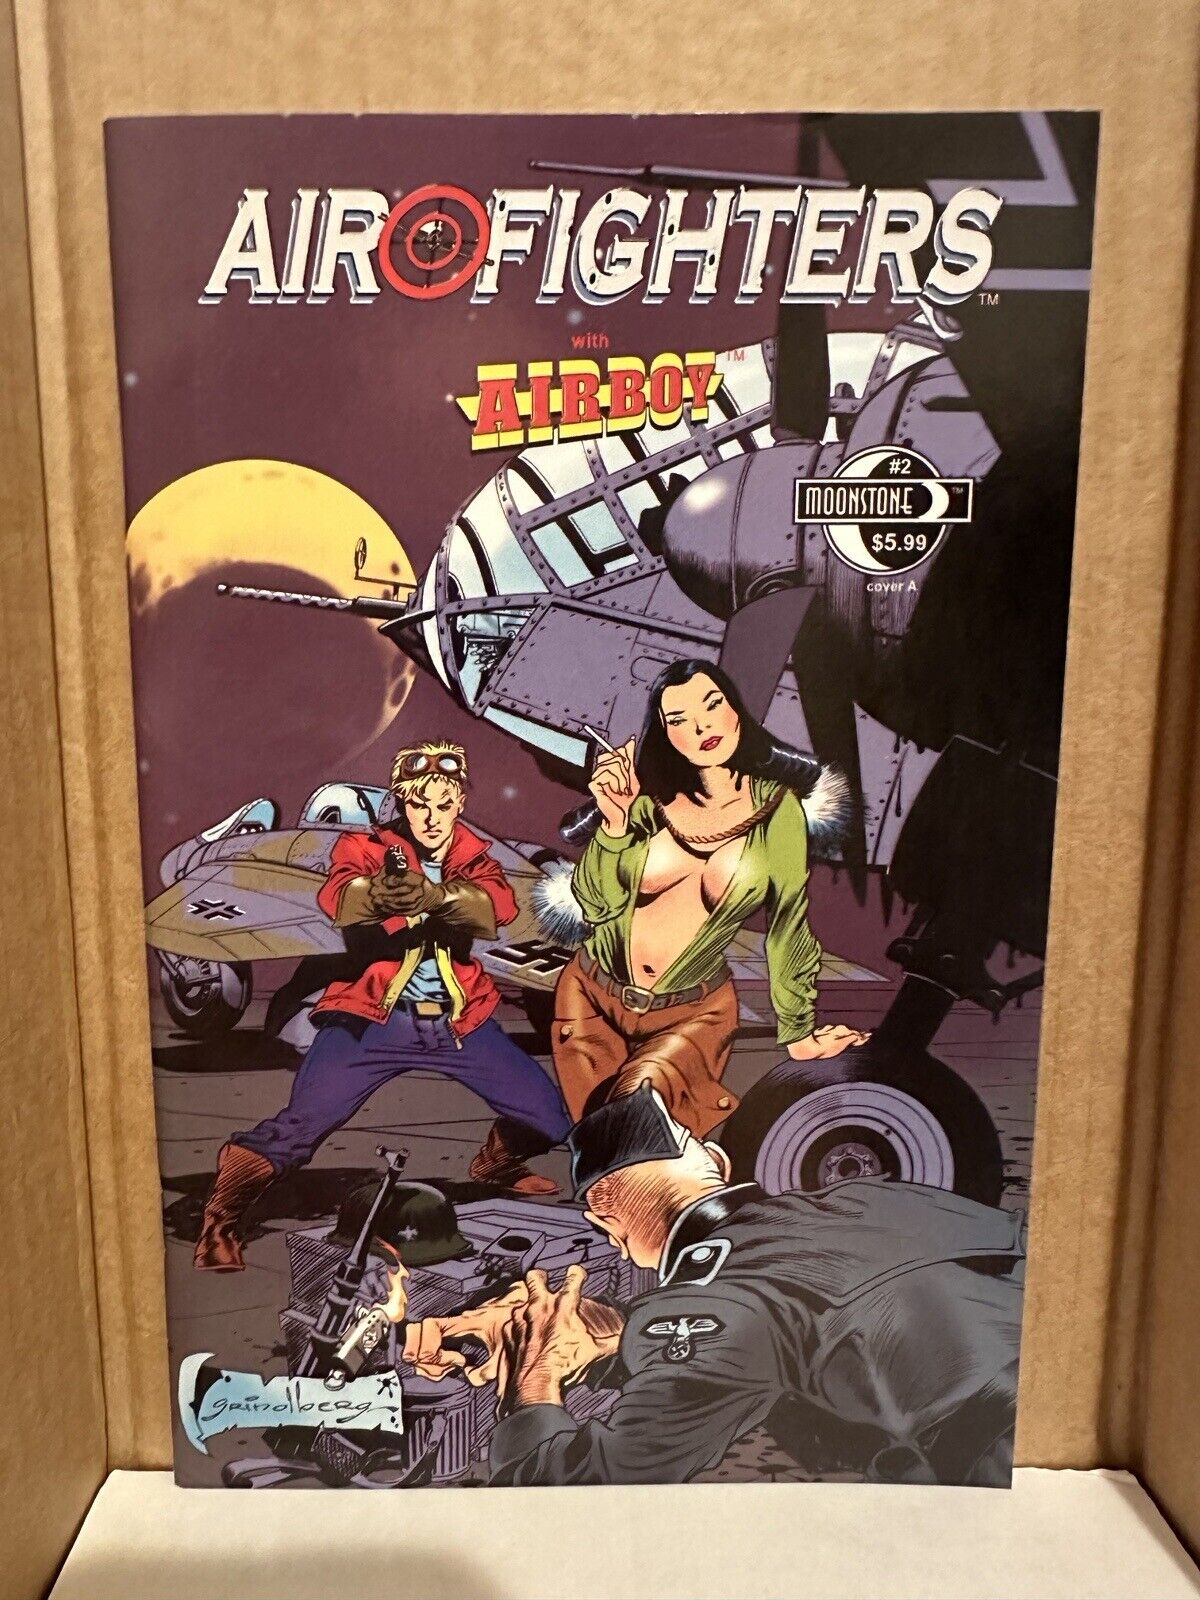 Airfighters #2 NM- Very HTF/LOW PRINT Newsstand Sexy Valkyrie Cover (2010)